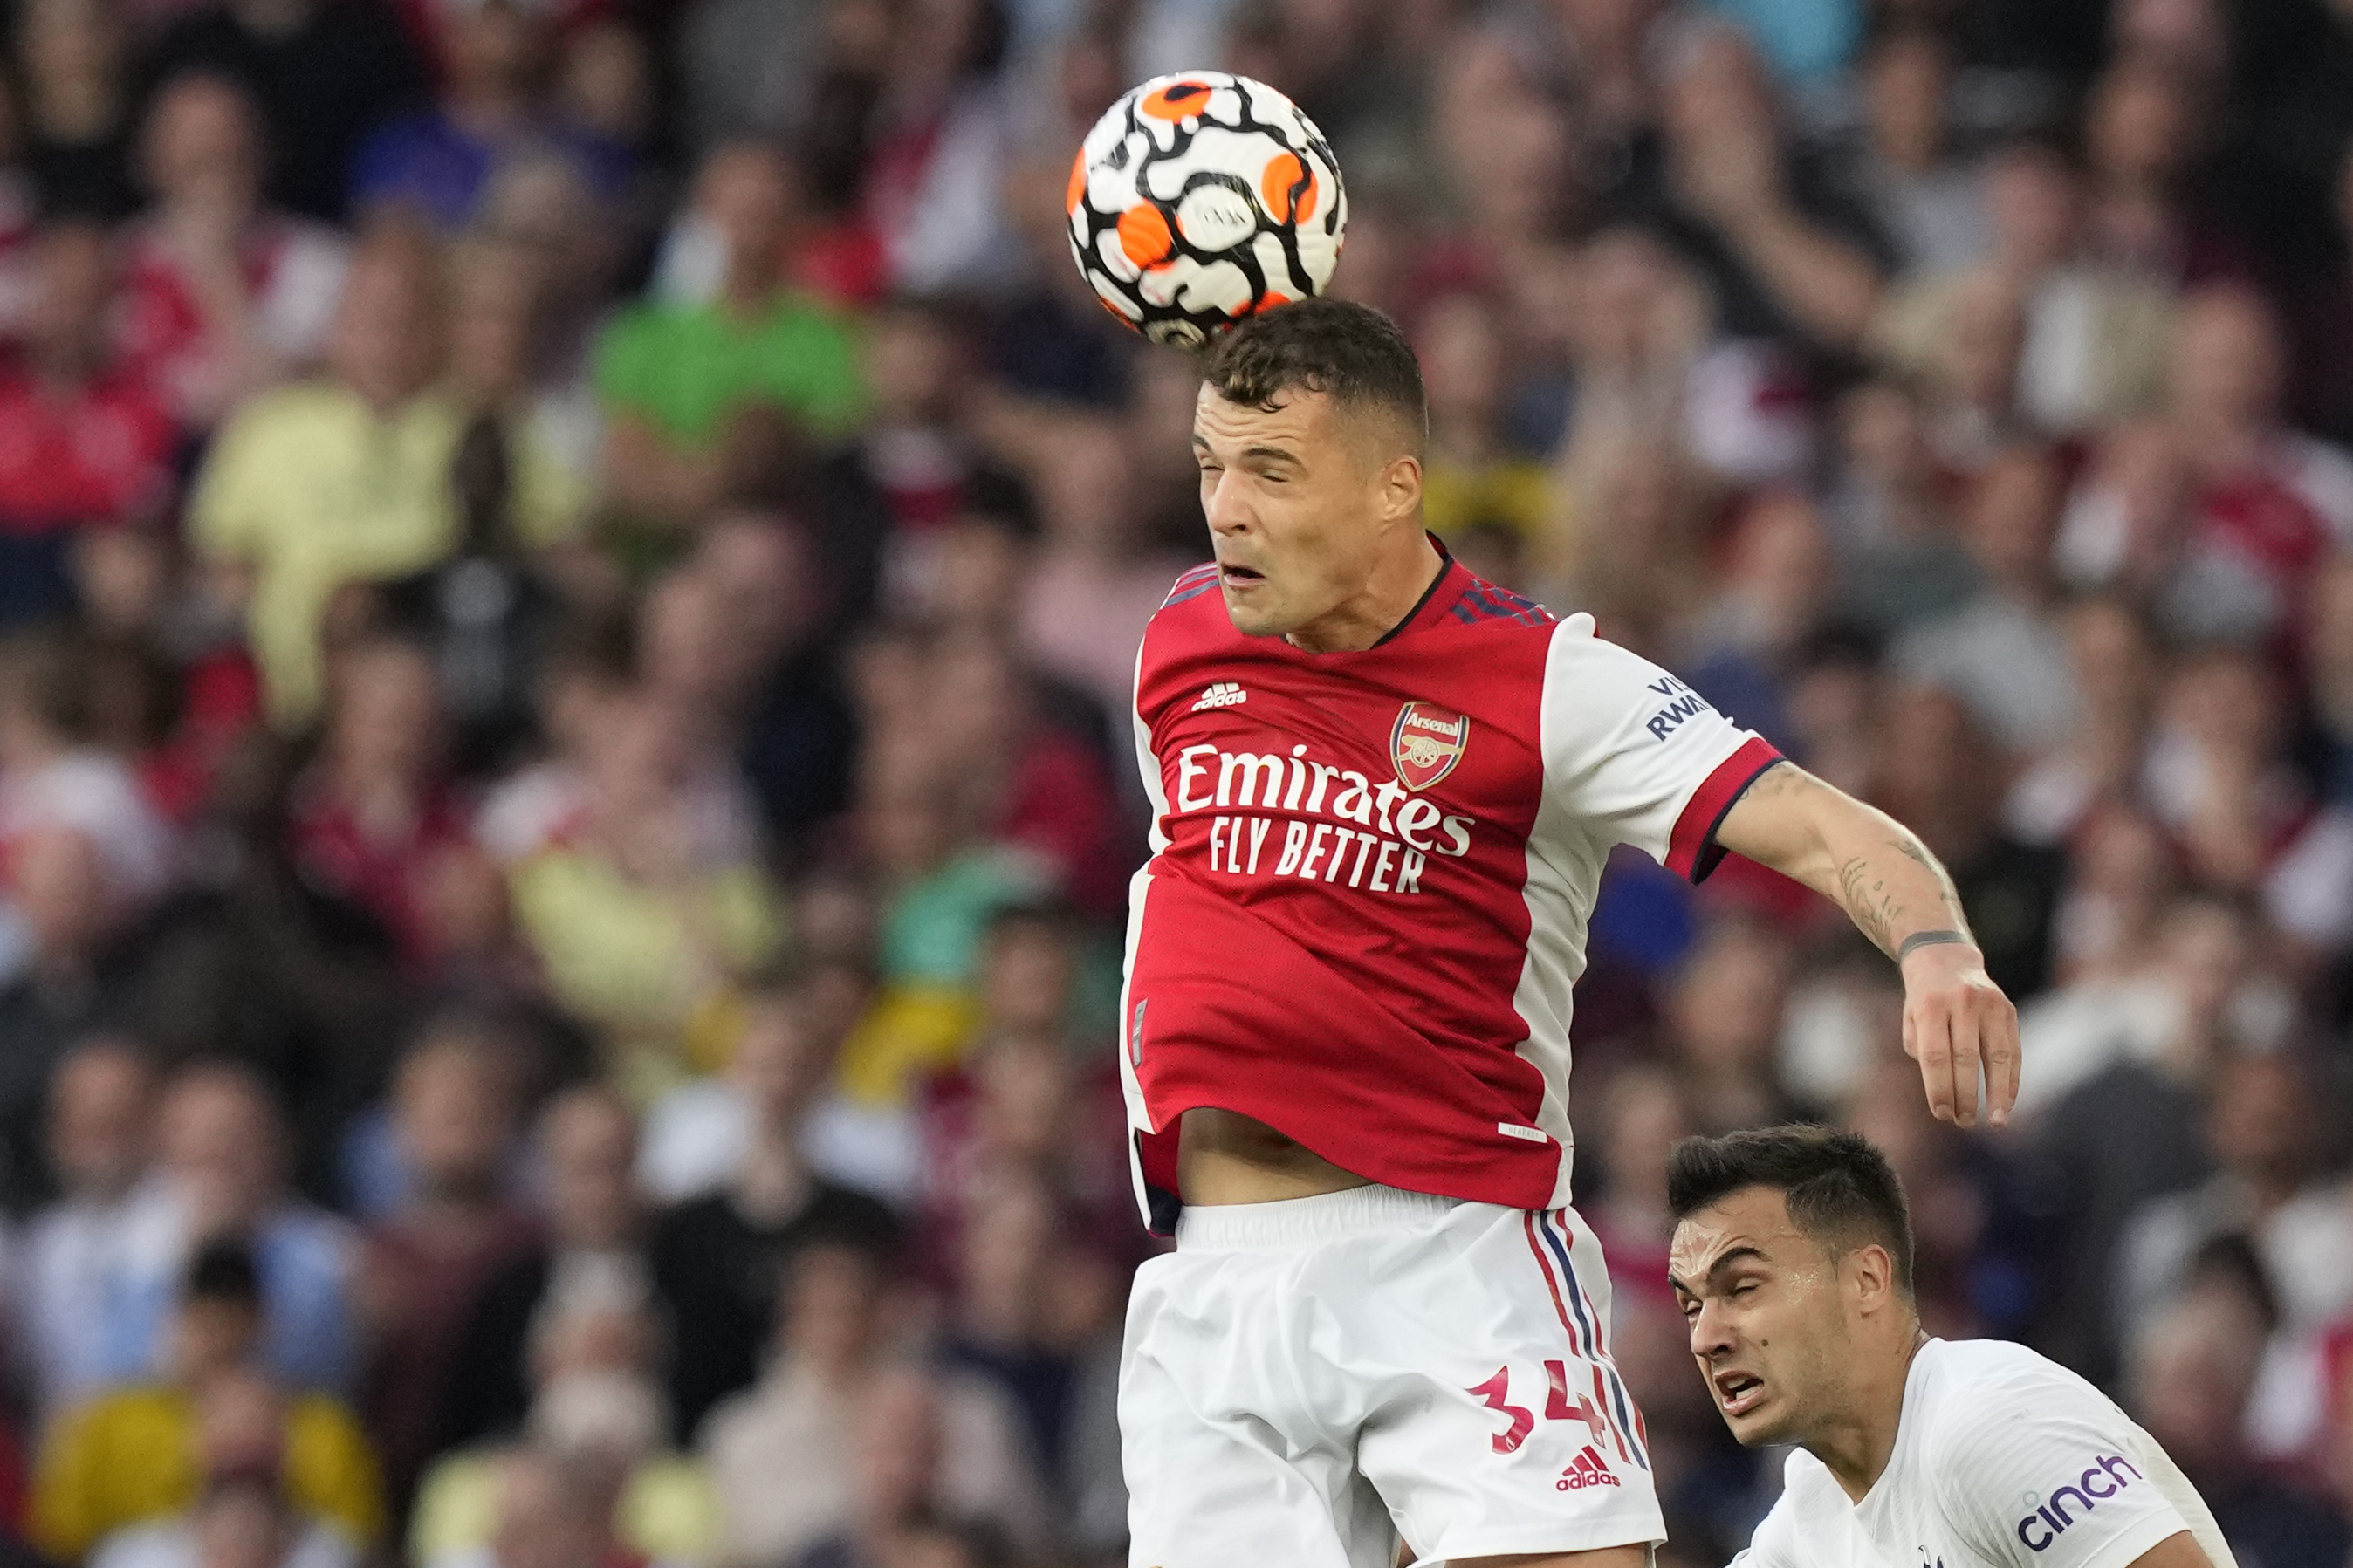 Granit Xhaka - 8: Swiss midfielder had his sensible hat on at Emirates. Rescued Ramsdale with strong challenge to hold off Hojbjerg after poor pass out that would set Arsenal off on counter attack for second goal. Excellent performance until limping off injured. AP